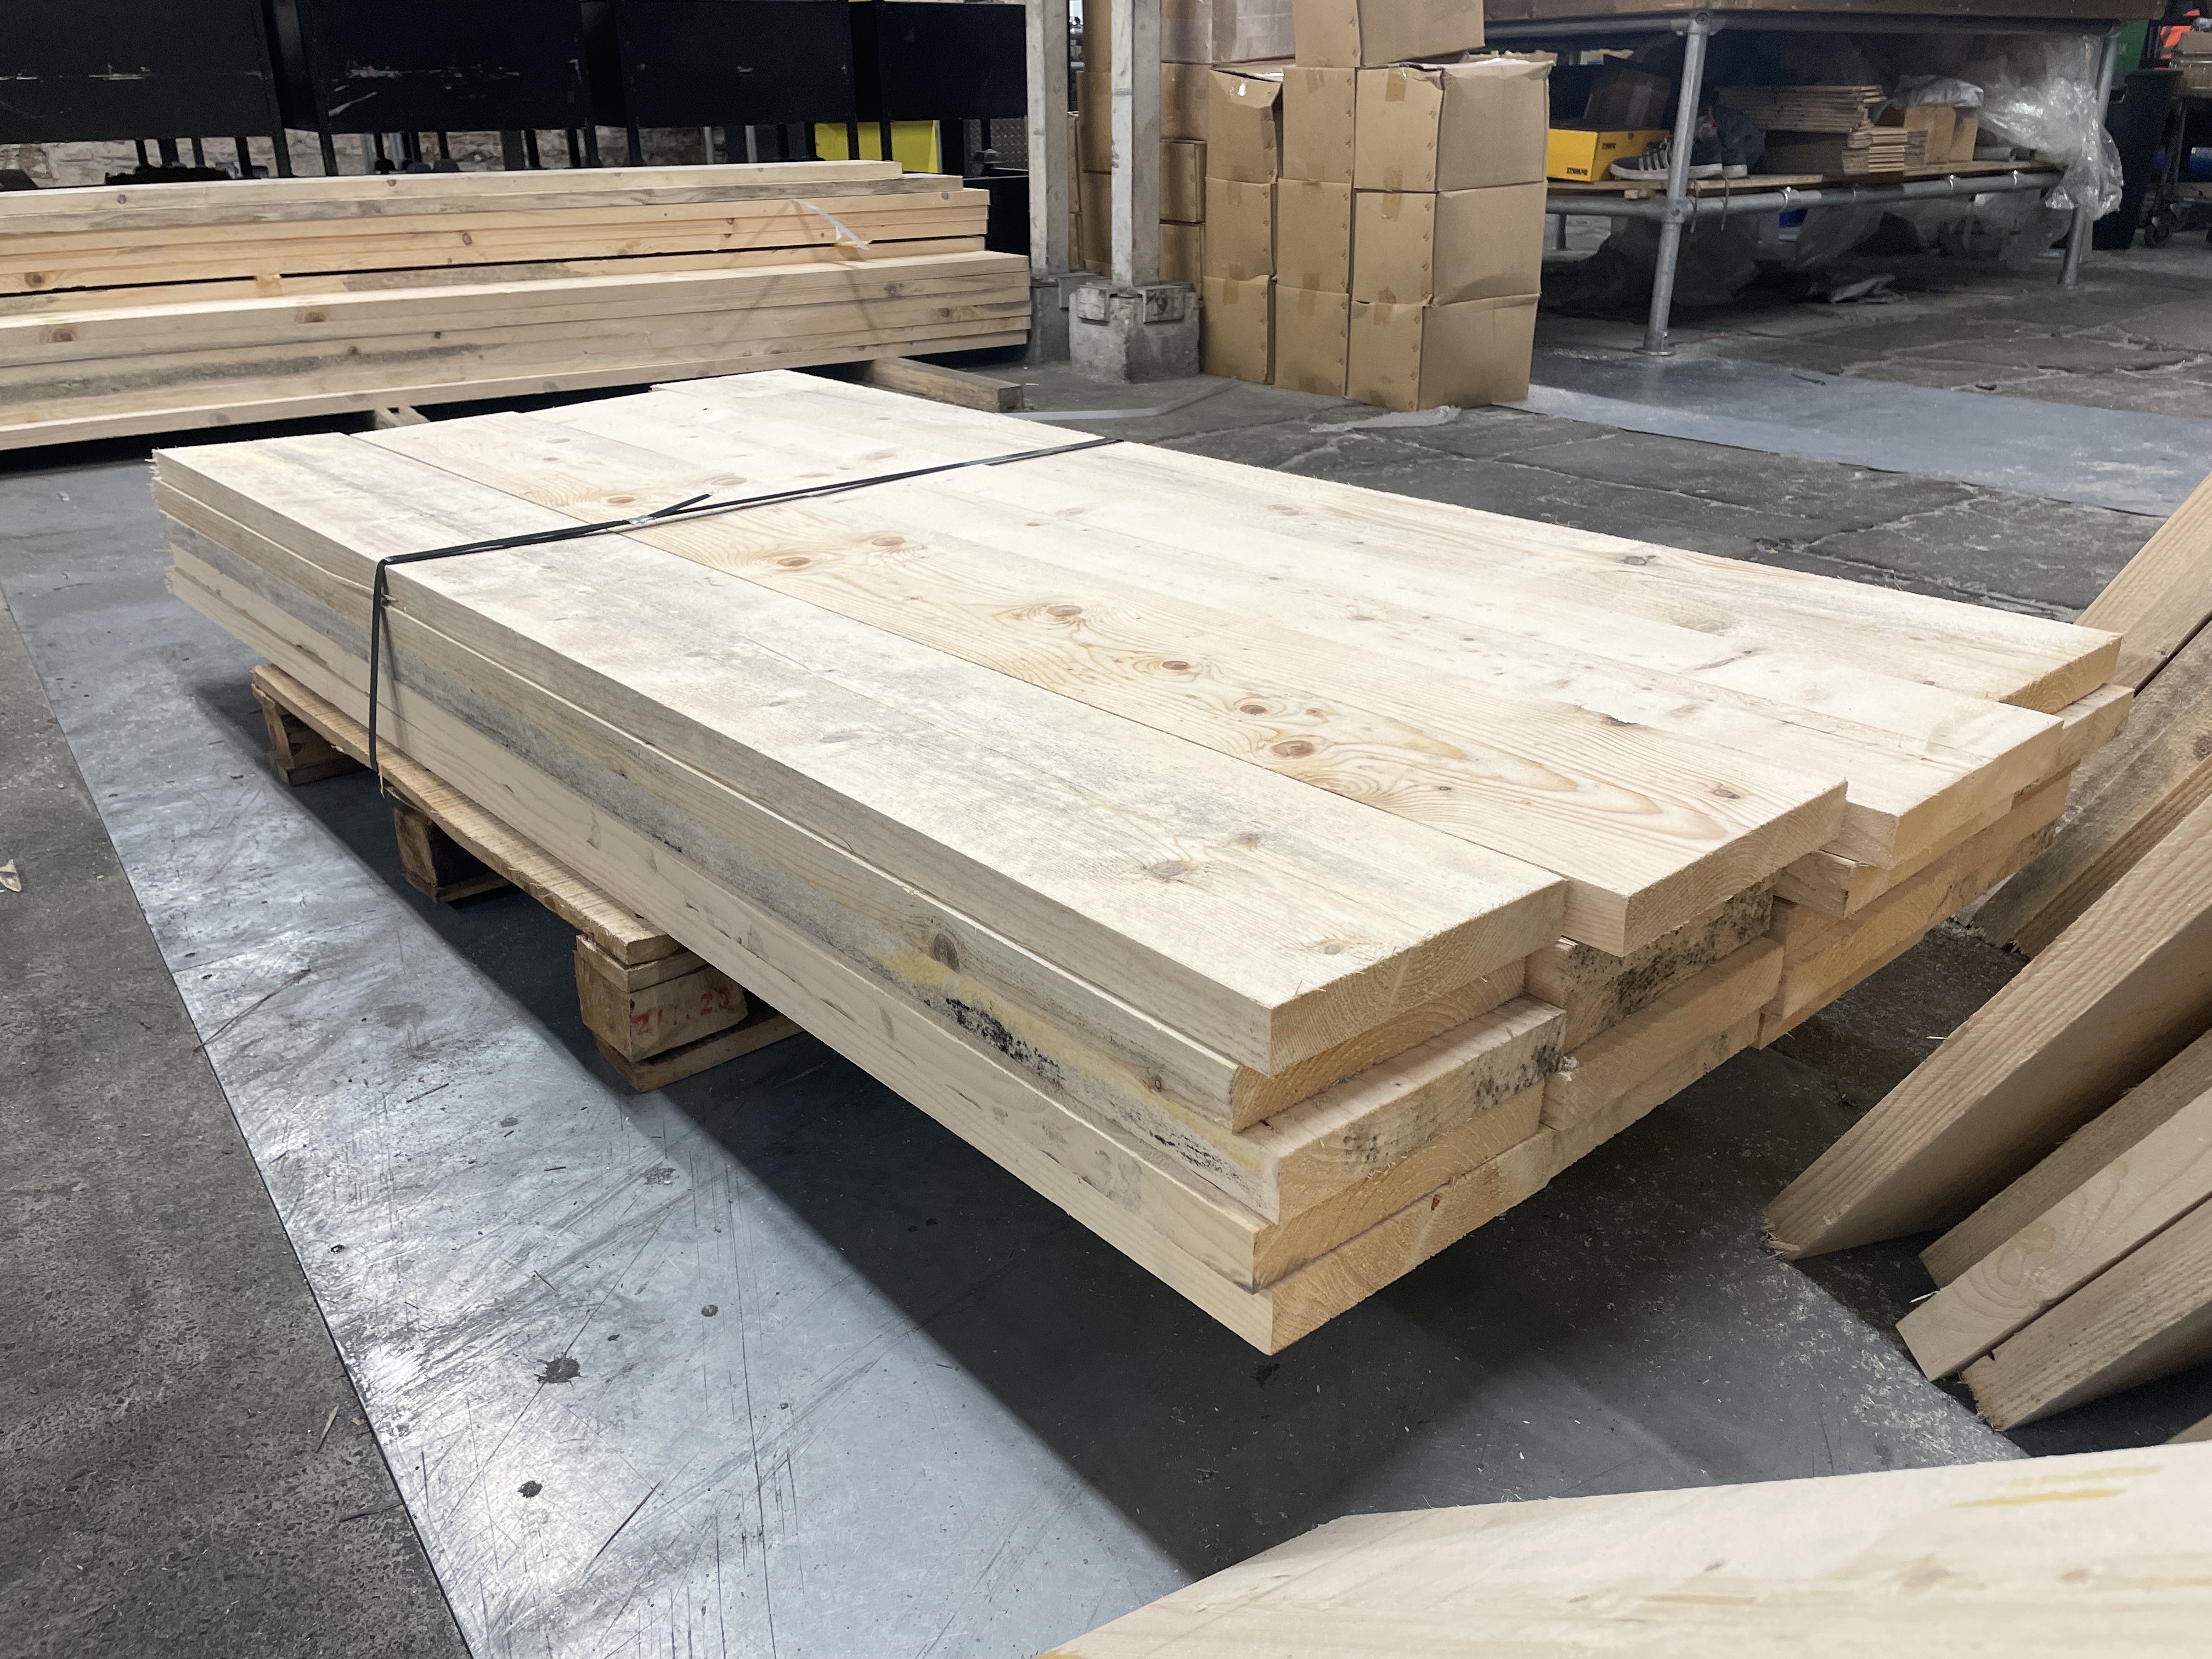 A small bundle of scaffold boards sat on a pallet within a warehouse environment